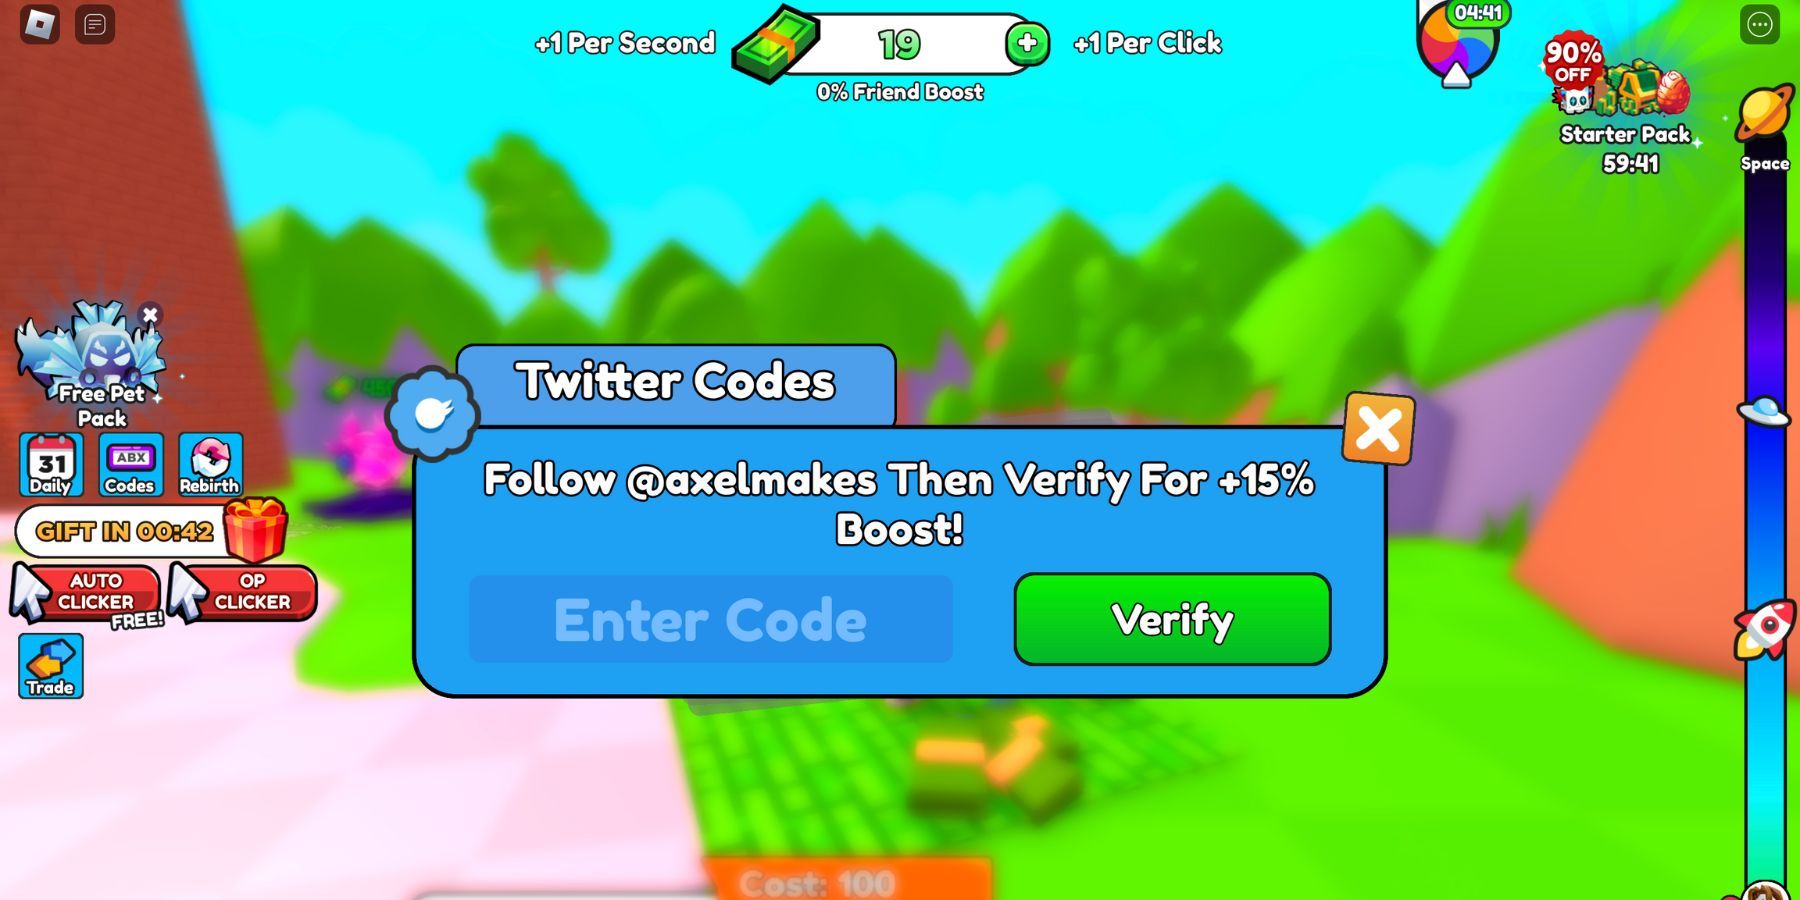 Get Richer Every Click: the Codes button